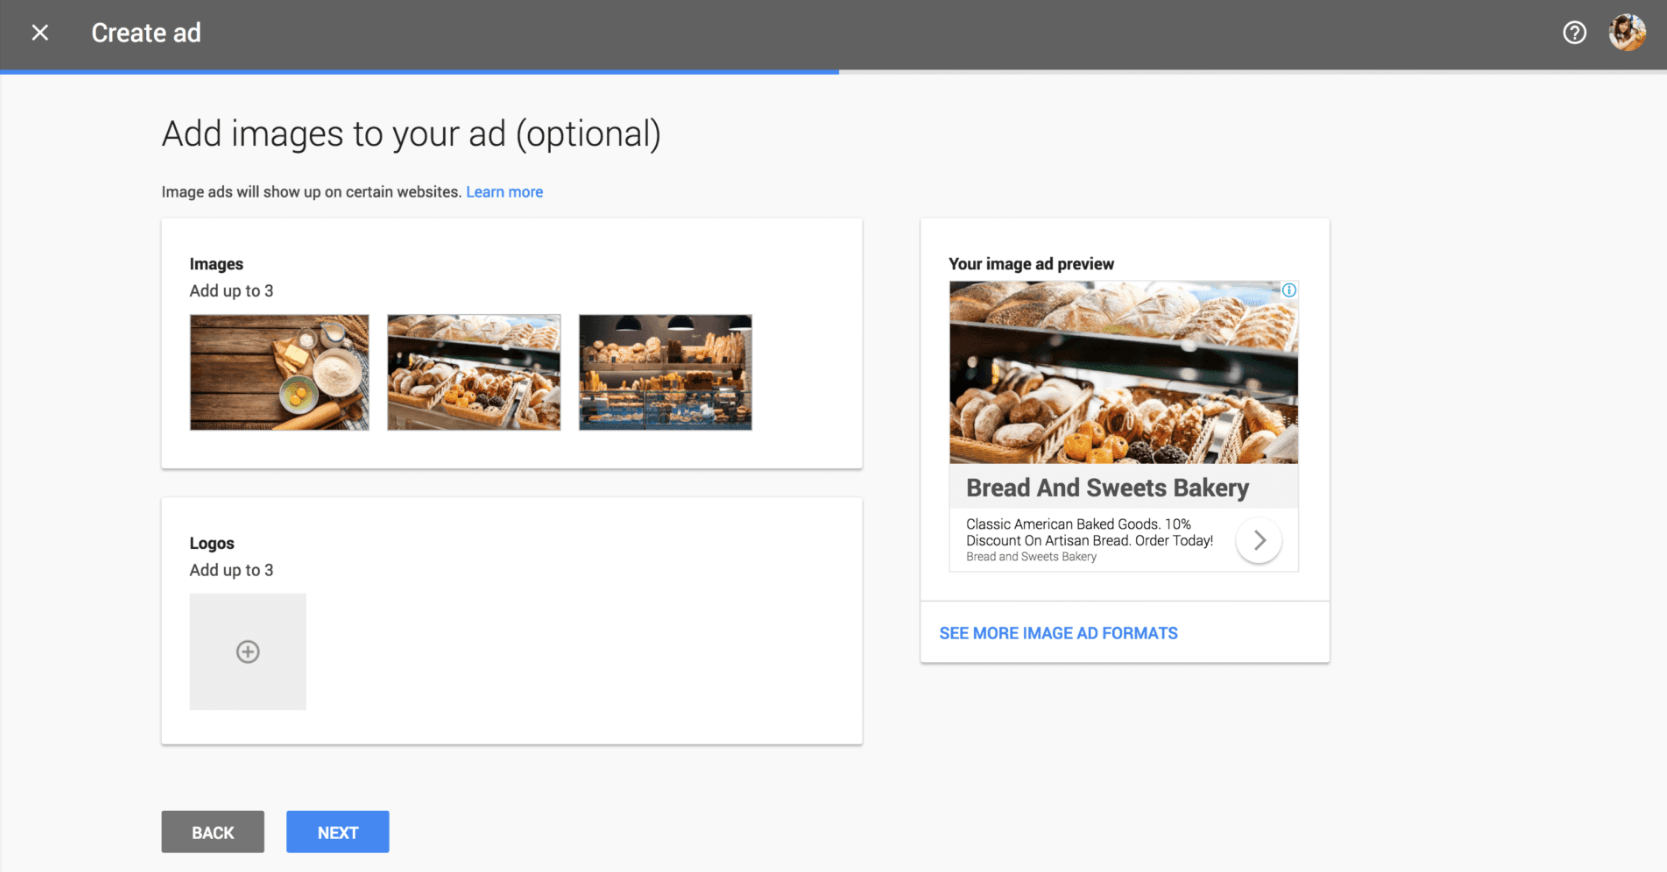 Image of a Google Smart Campaign ad for a bakery generated using Machine Learning.